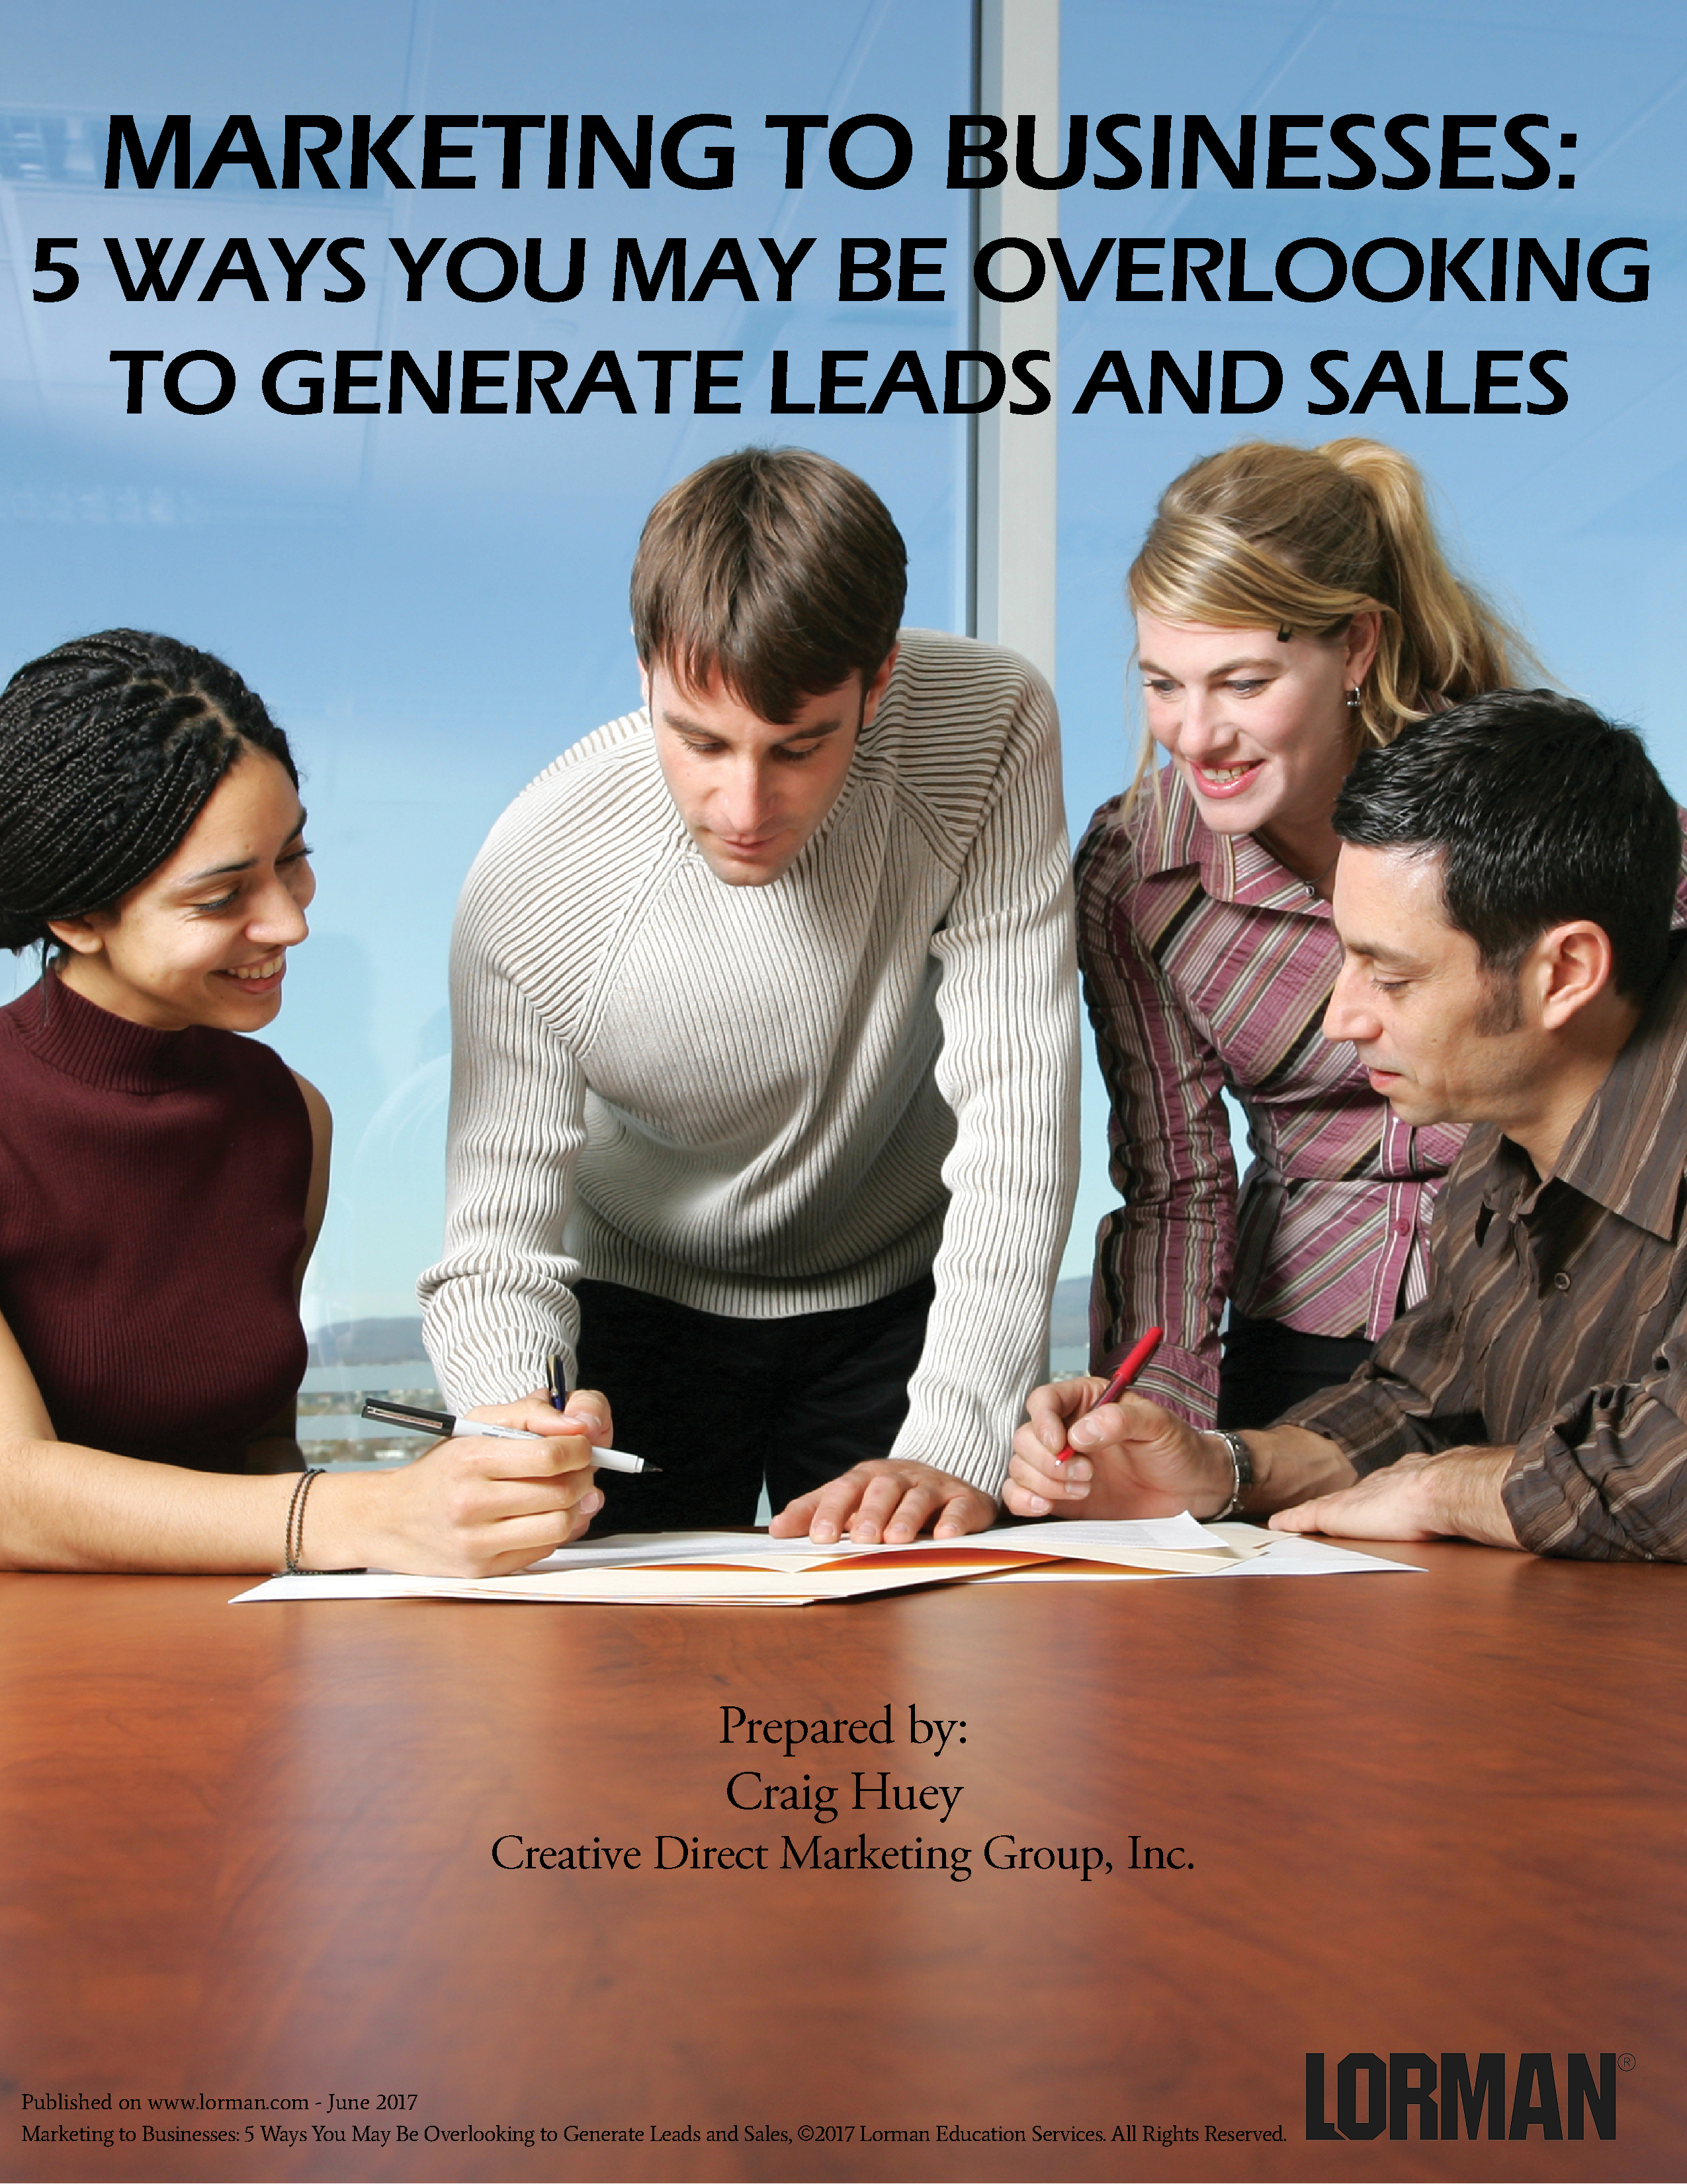 Marketing to Businesses:  5 Ways You May Be Overlooking to Generate Leads and Sales